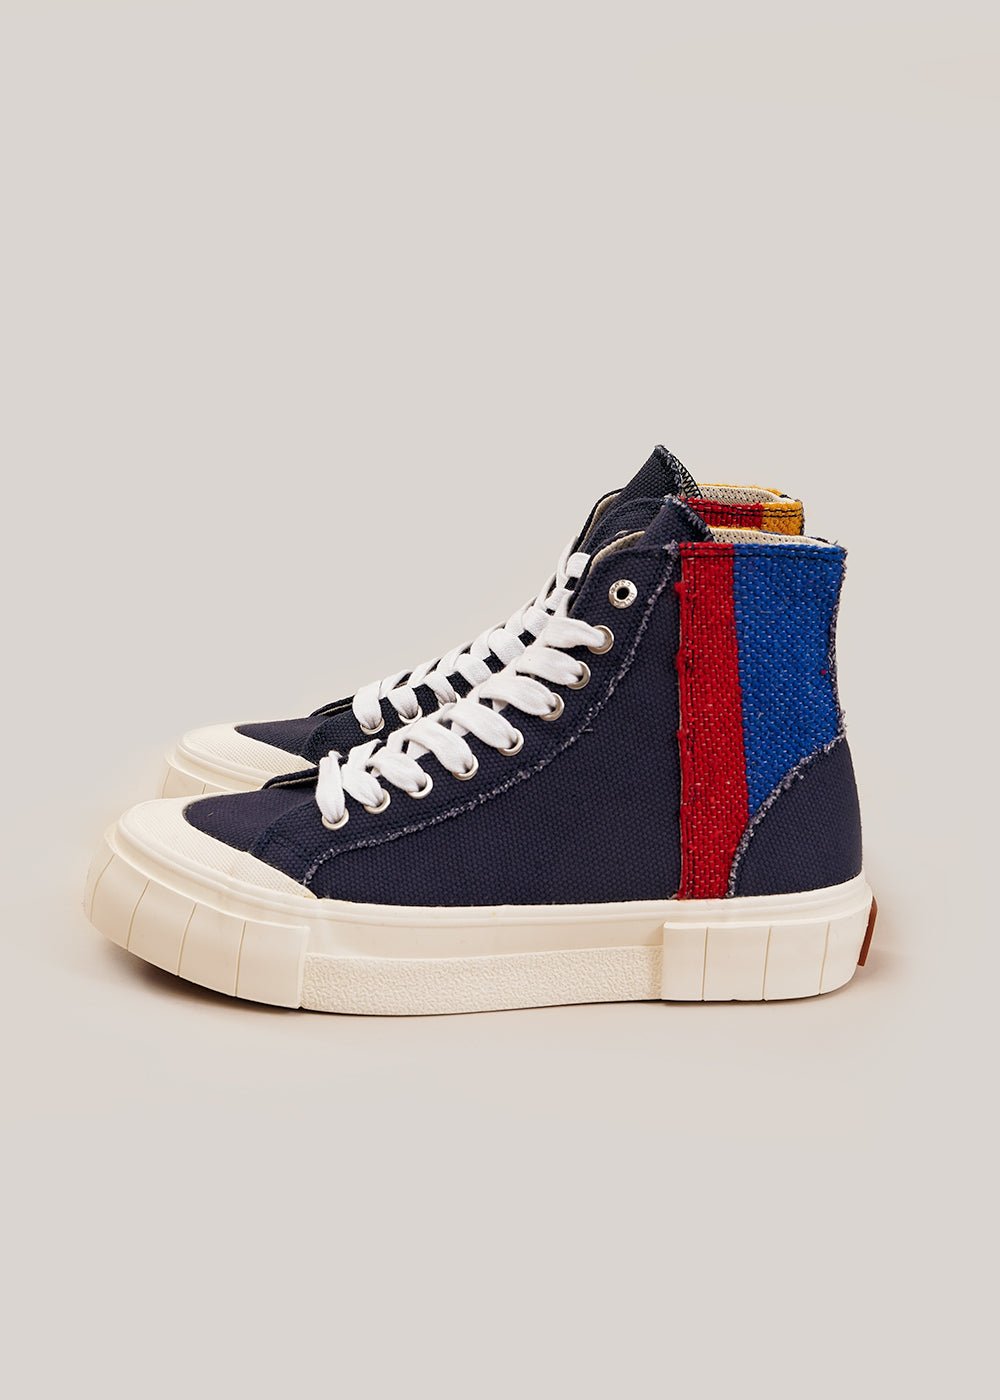 GOOD NEWS Navy Palm Moroccan Sneakers - New Classics Studios Sustainable Ethical Fashion Canada